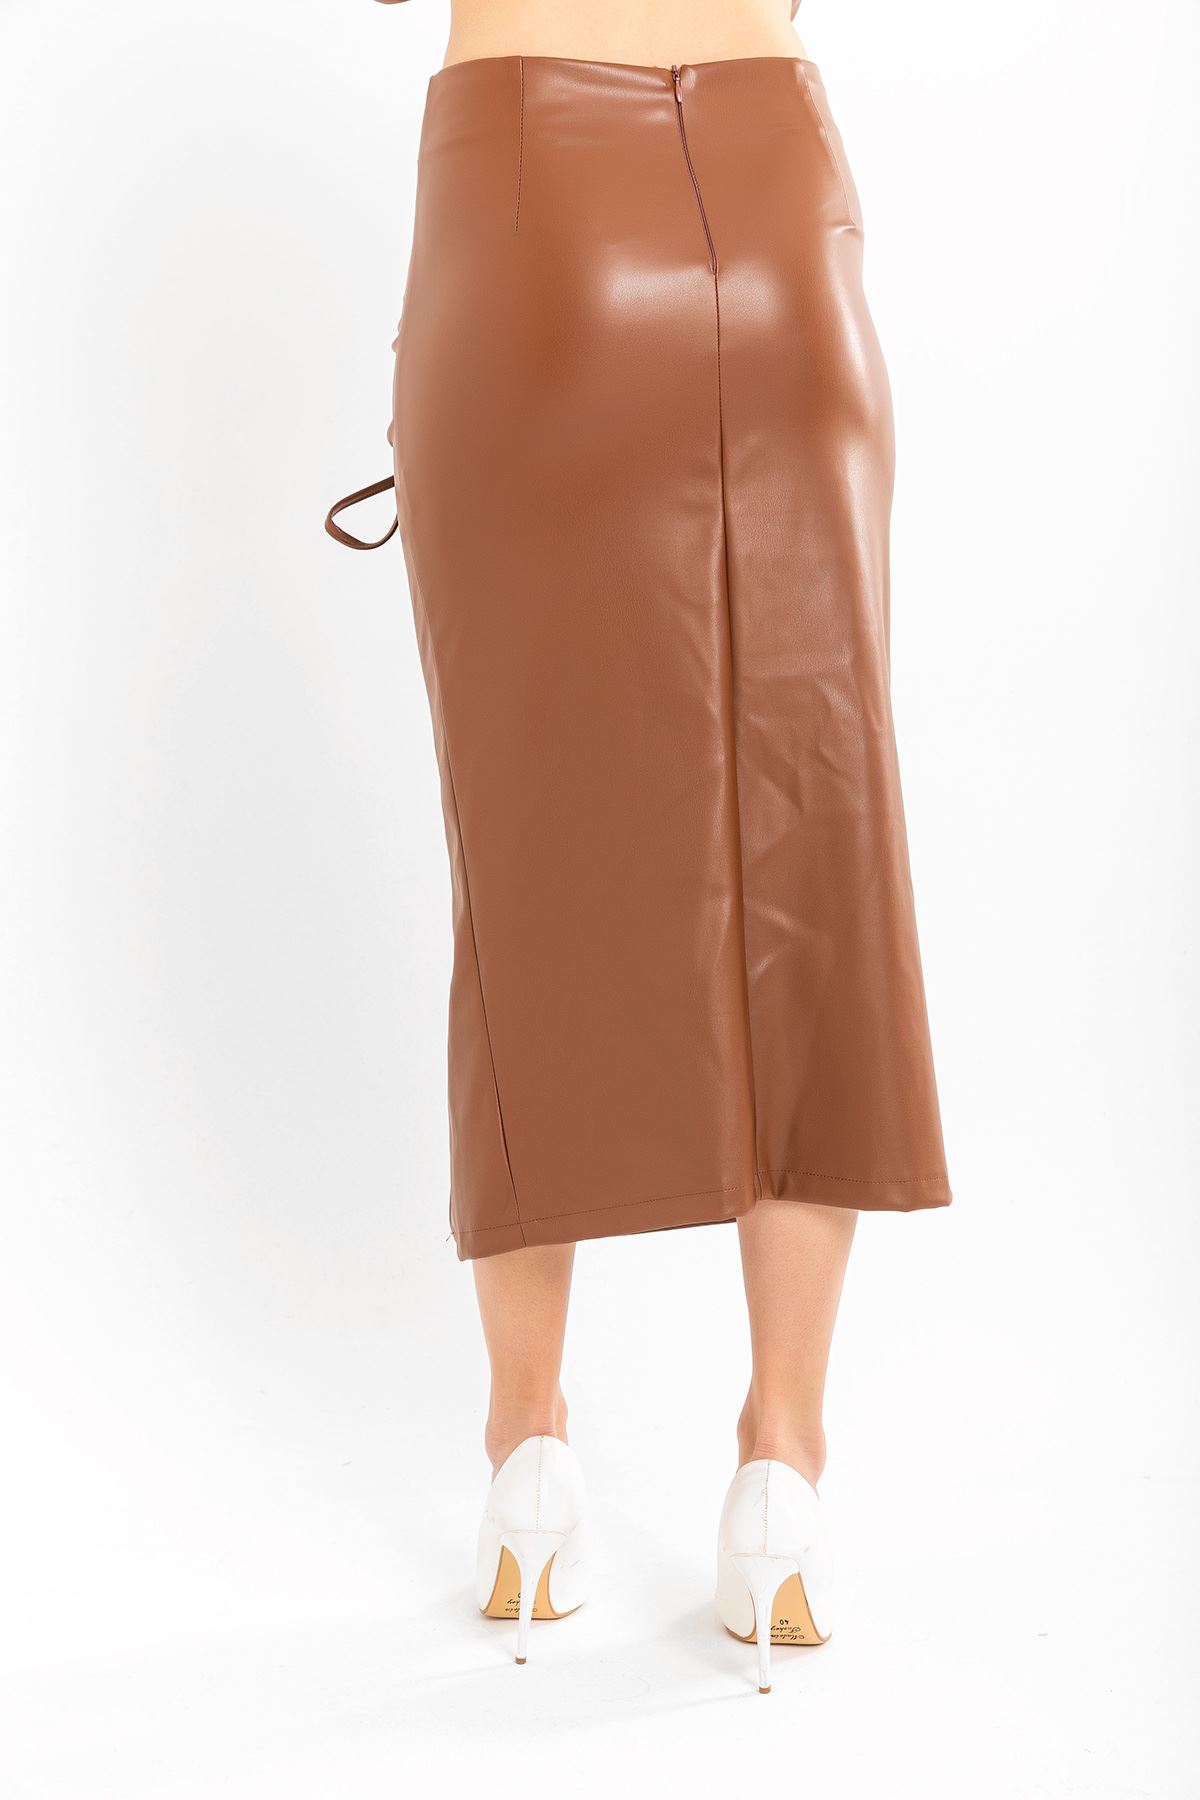 Leather Fabric Above Knee Shirred Slit Women'S Skirt - Brown